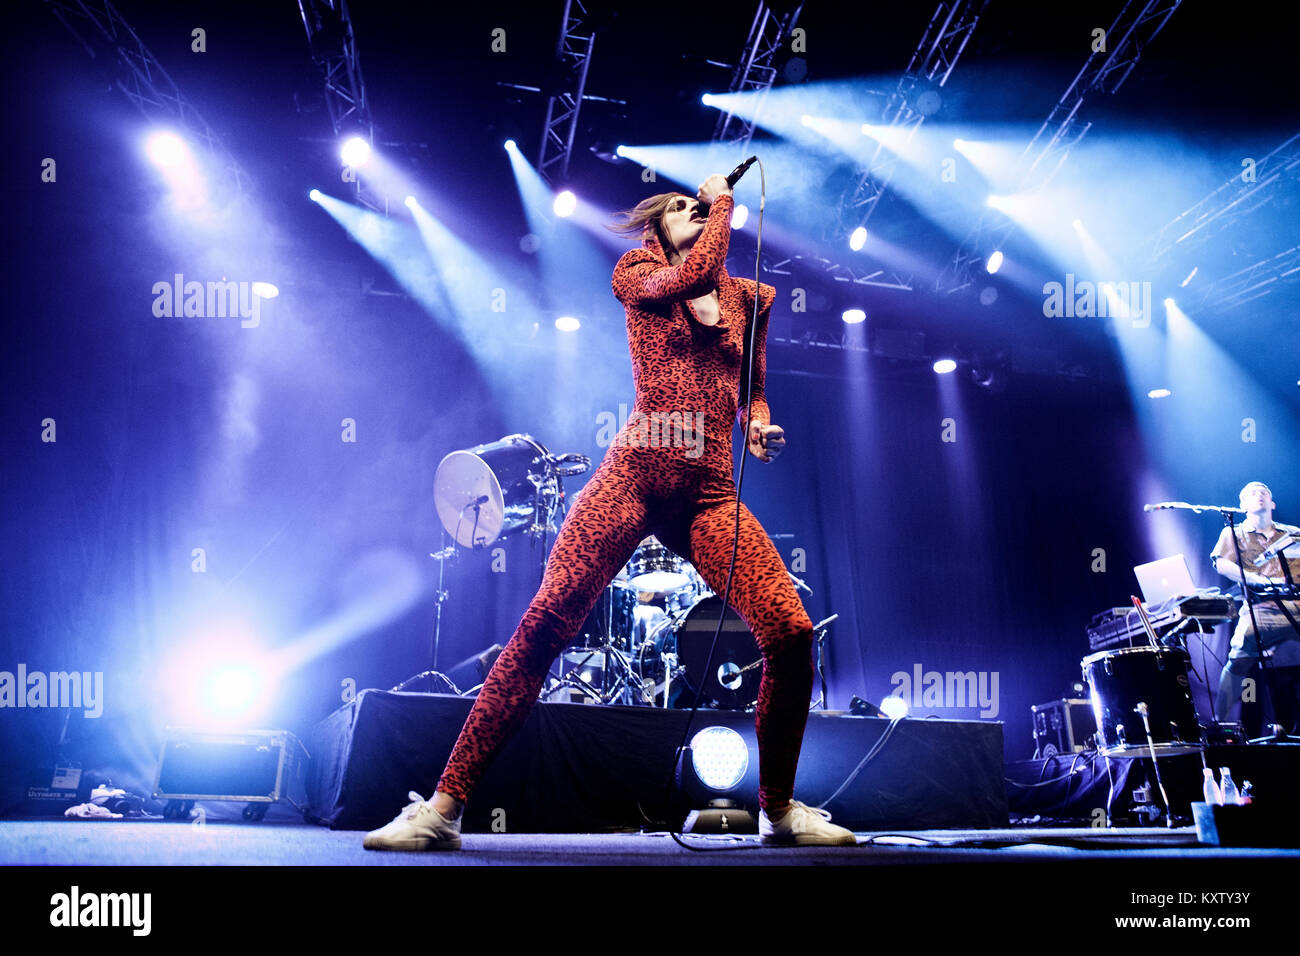 The French band Yelle performs a live concert at Roskilde Festival 2011. The band is here led by lead singer and namesake Yelle (Julie Budet). Denmark 02/07 2011. Stock Photo